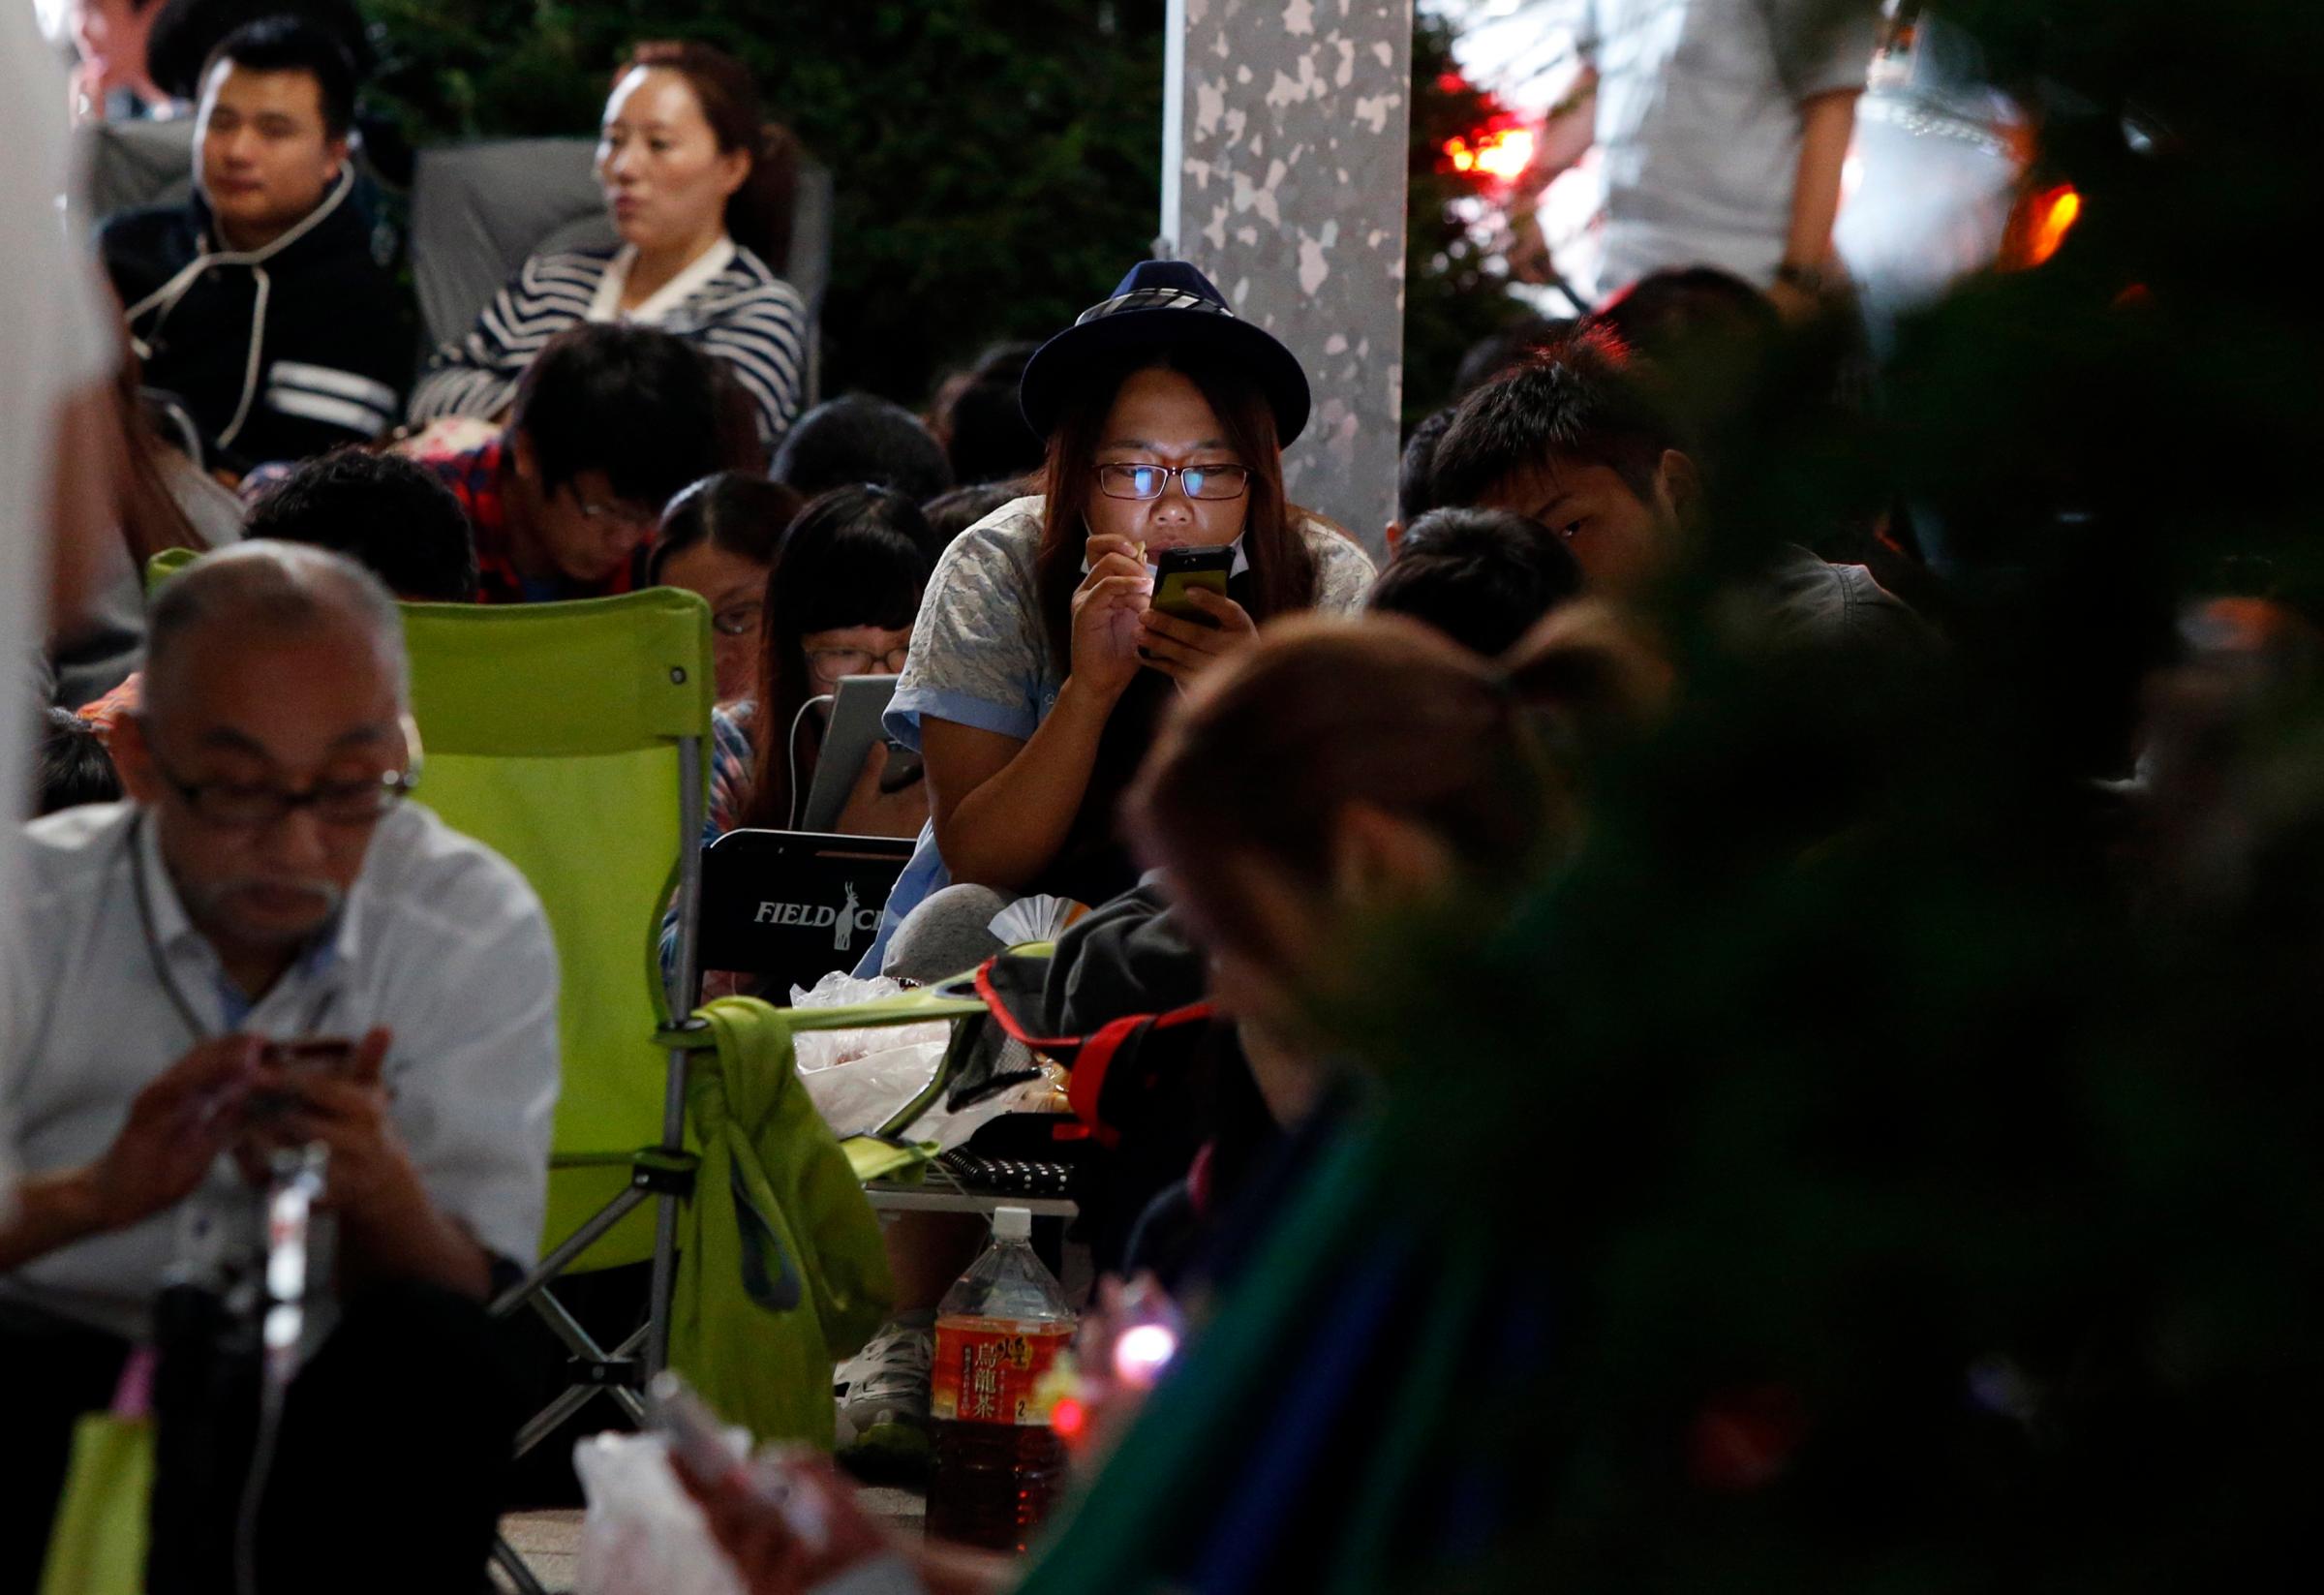 People wait for the release of Apple's new iPhone 6 and 6 Plus in front of the Apple Store in Tokyo on Sept. 18, 2014.